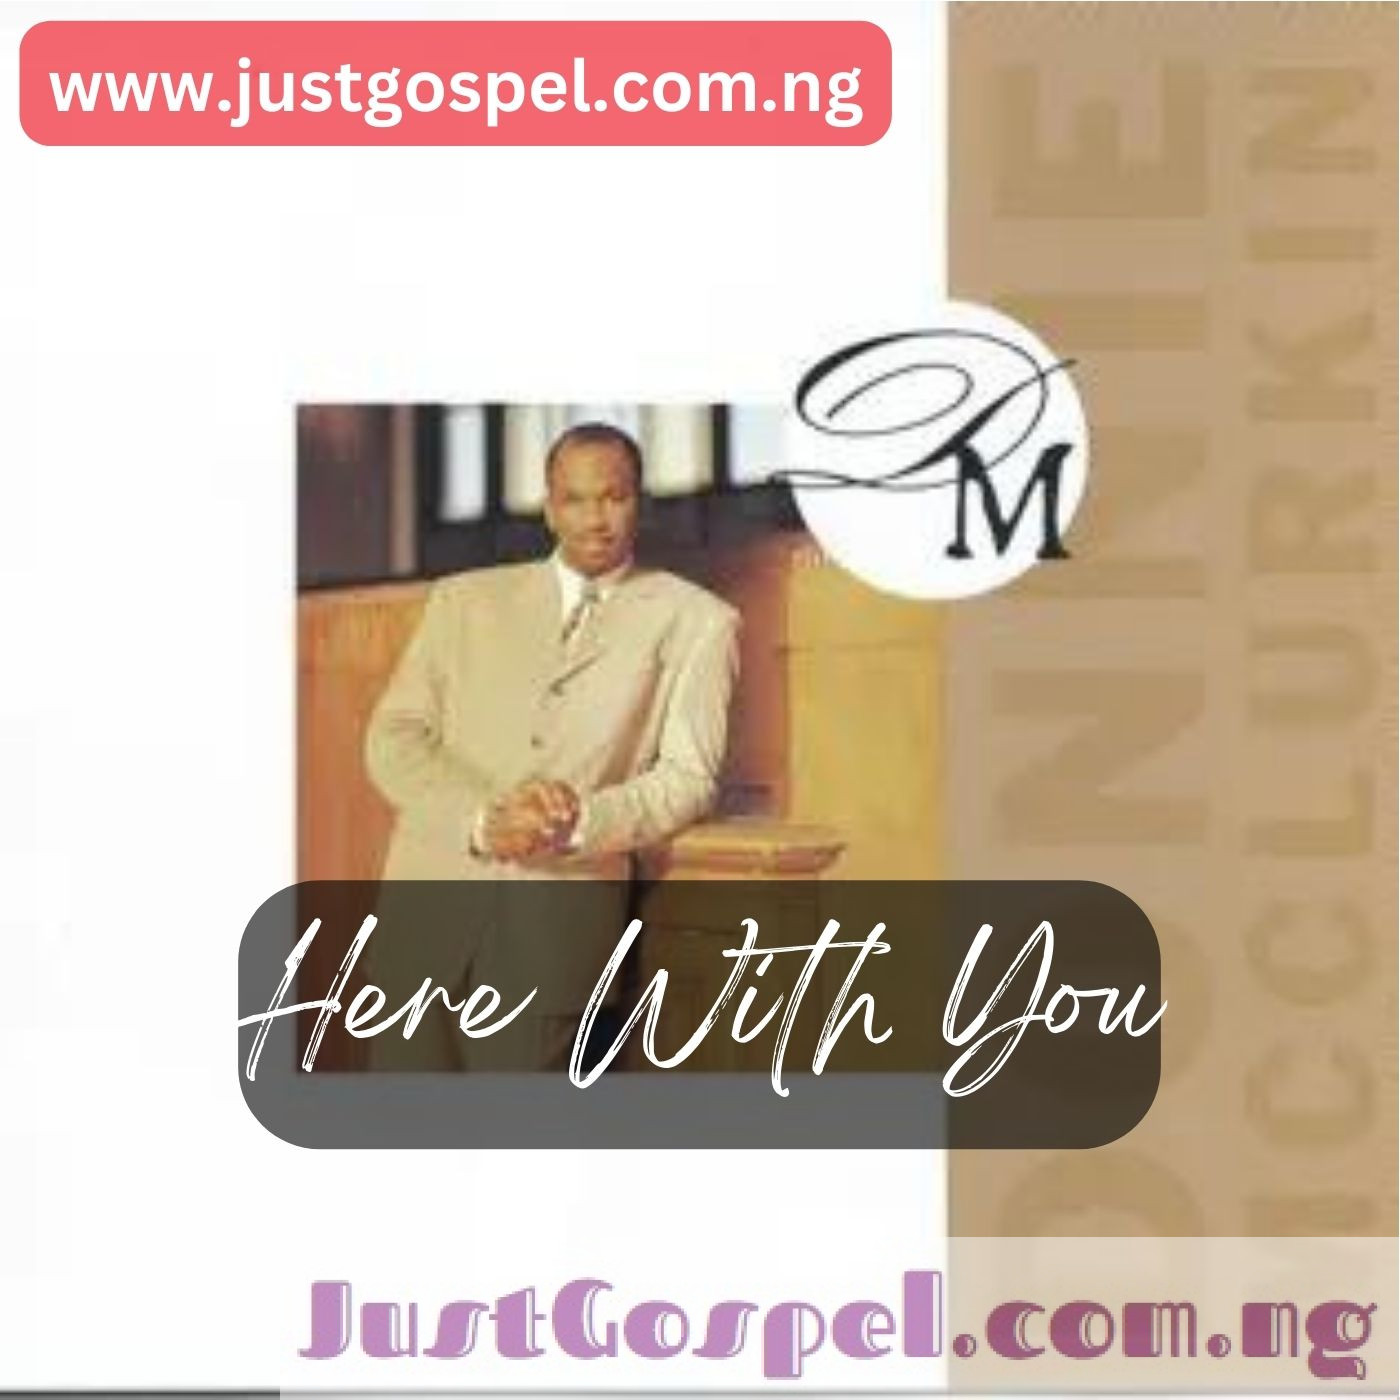 Donnie McClurkin – Here With You Mp3 Download, Lyrics